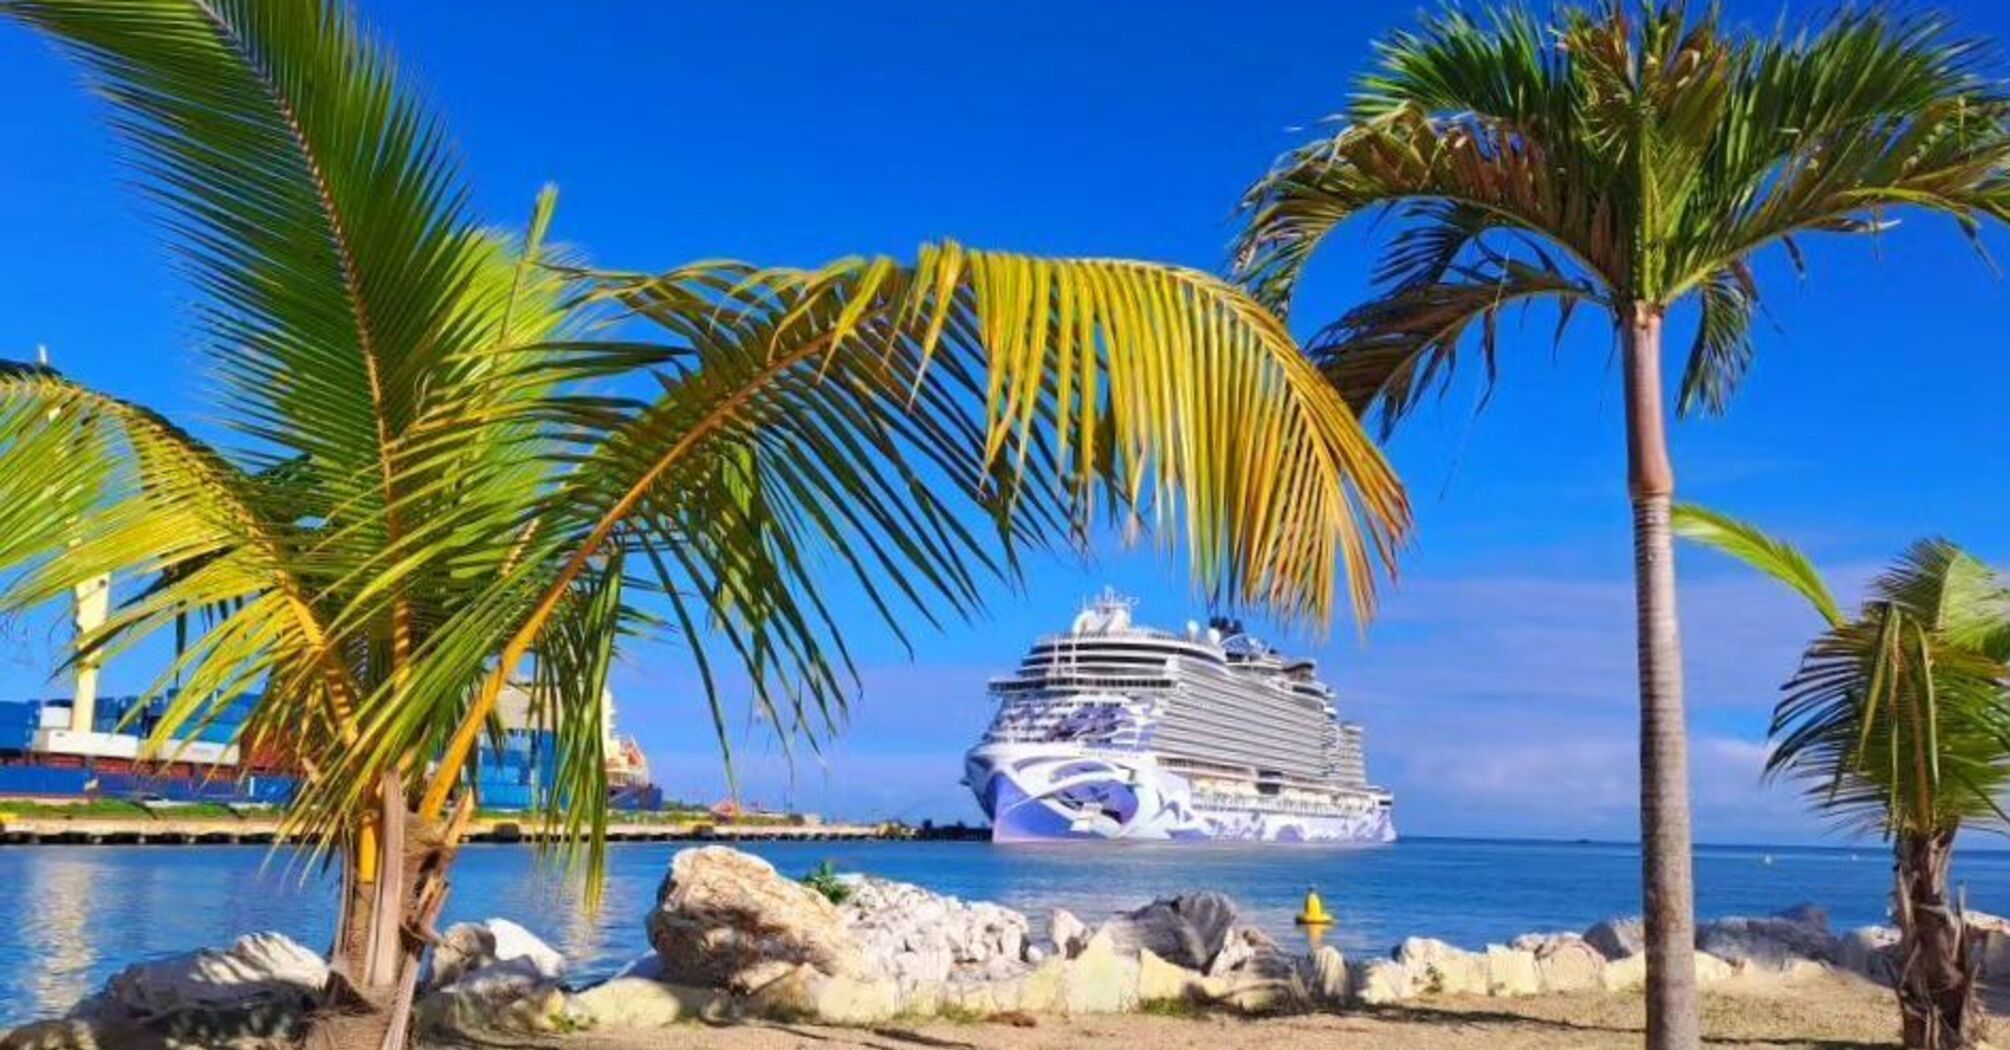 For romantics and adventurers: The 10 best Caribbean cruises this winter